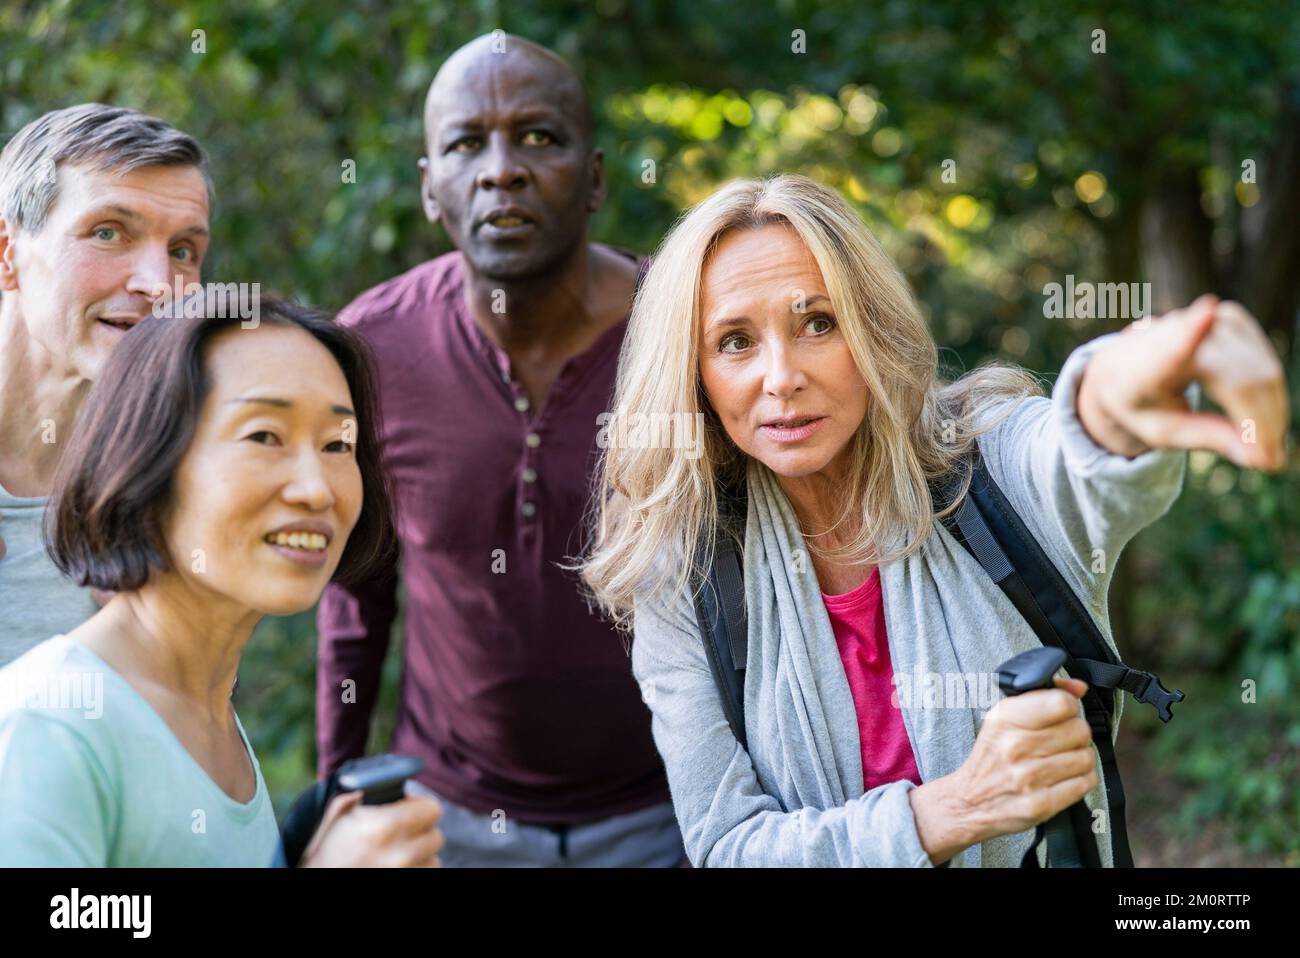 Senior woman giving directions to diverse group of people while pointing Stock Photo